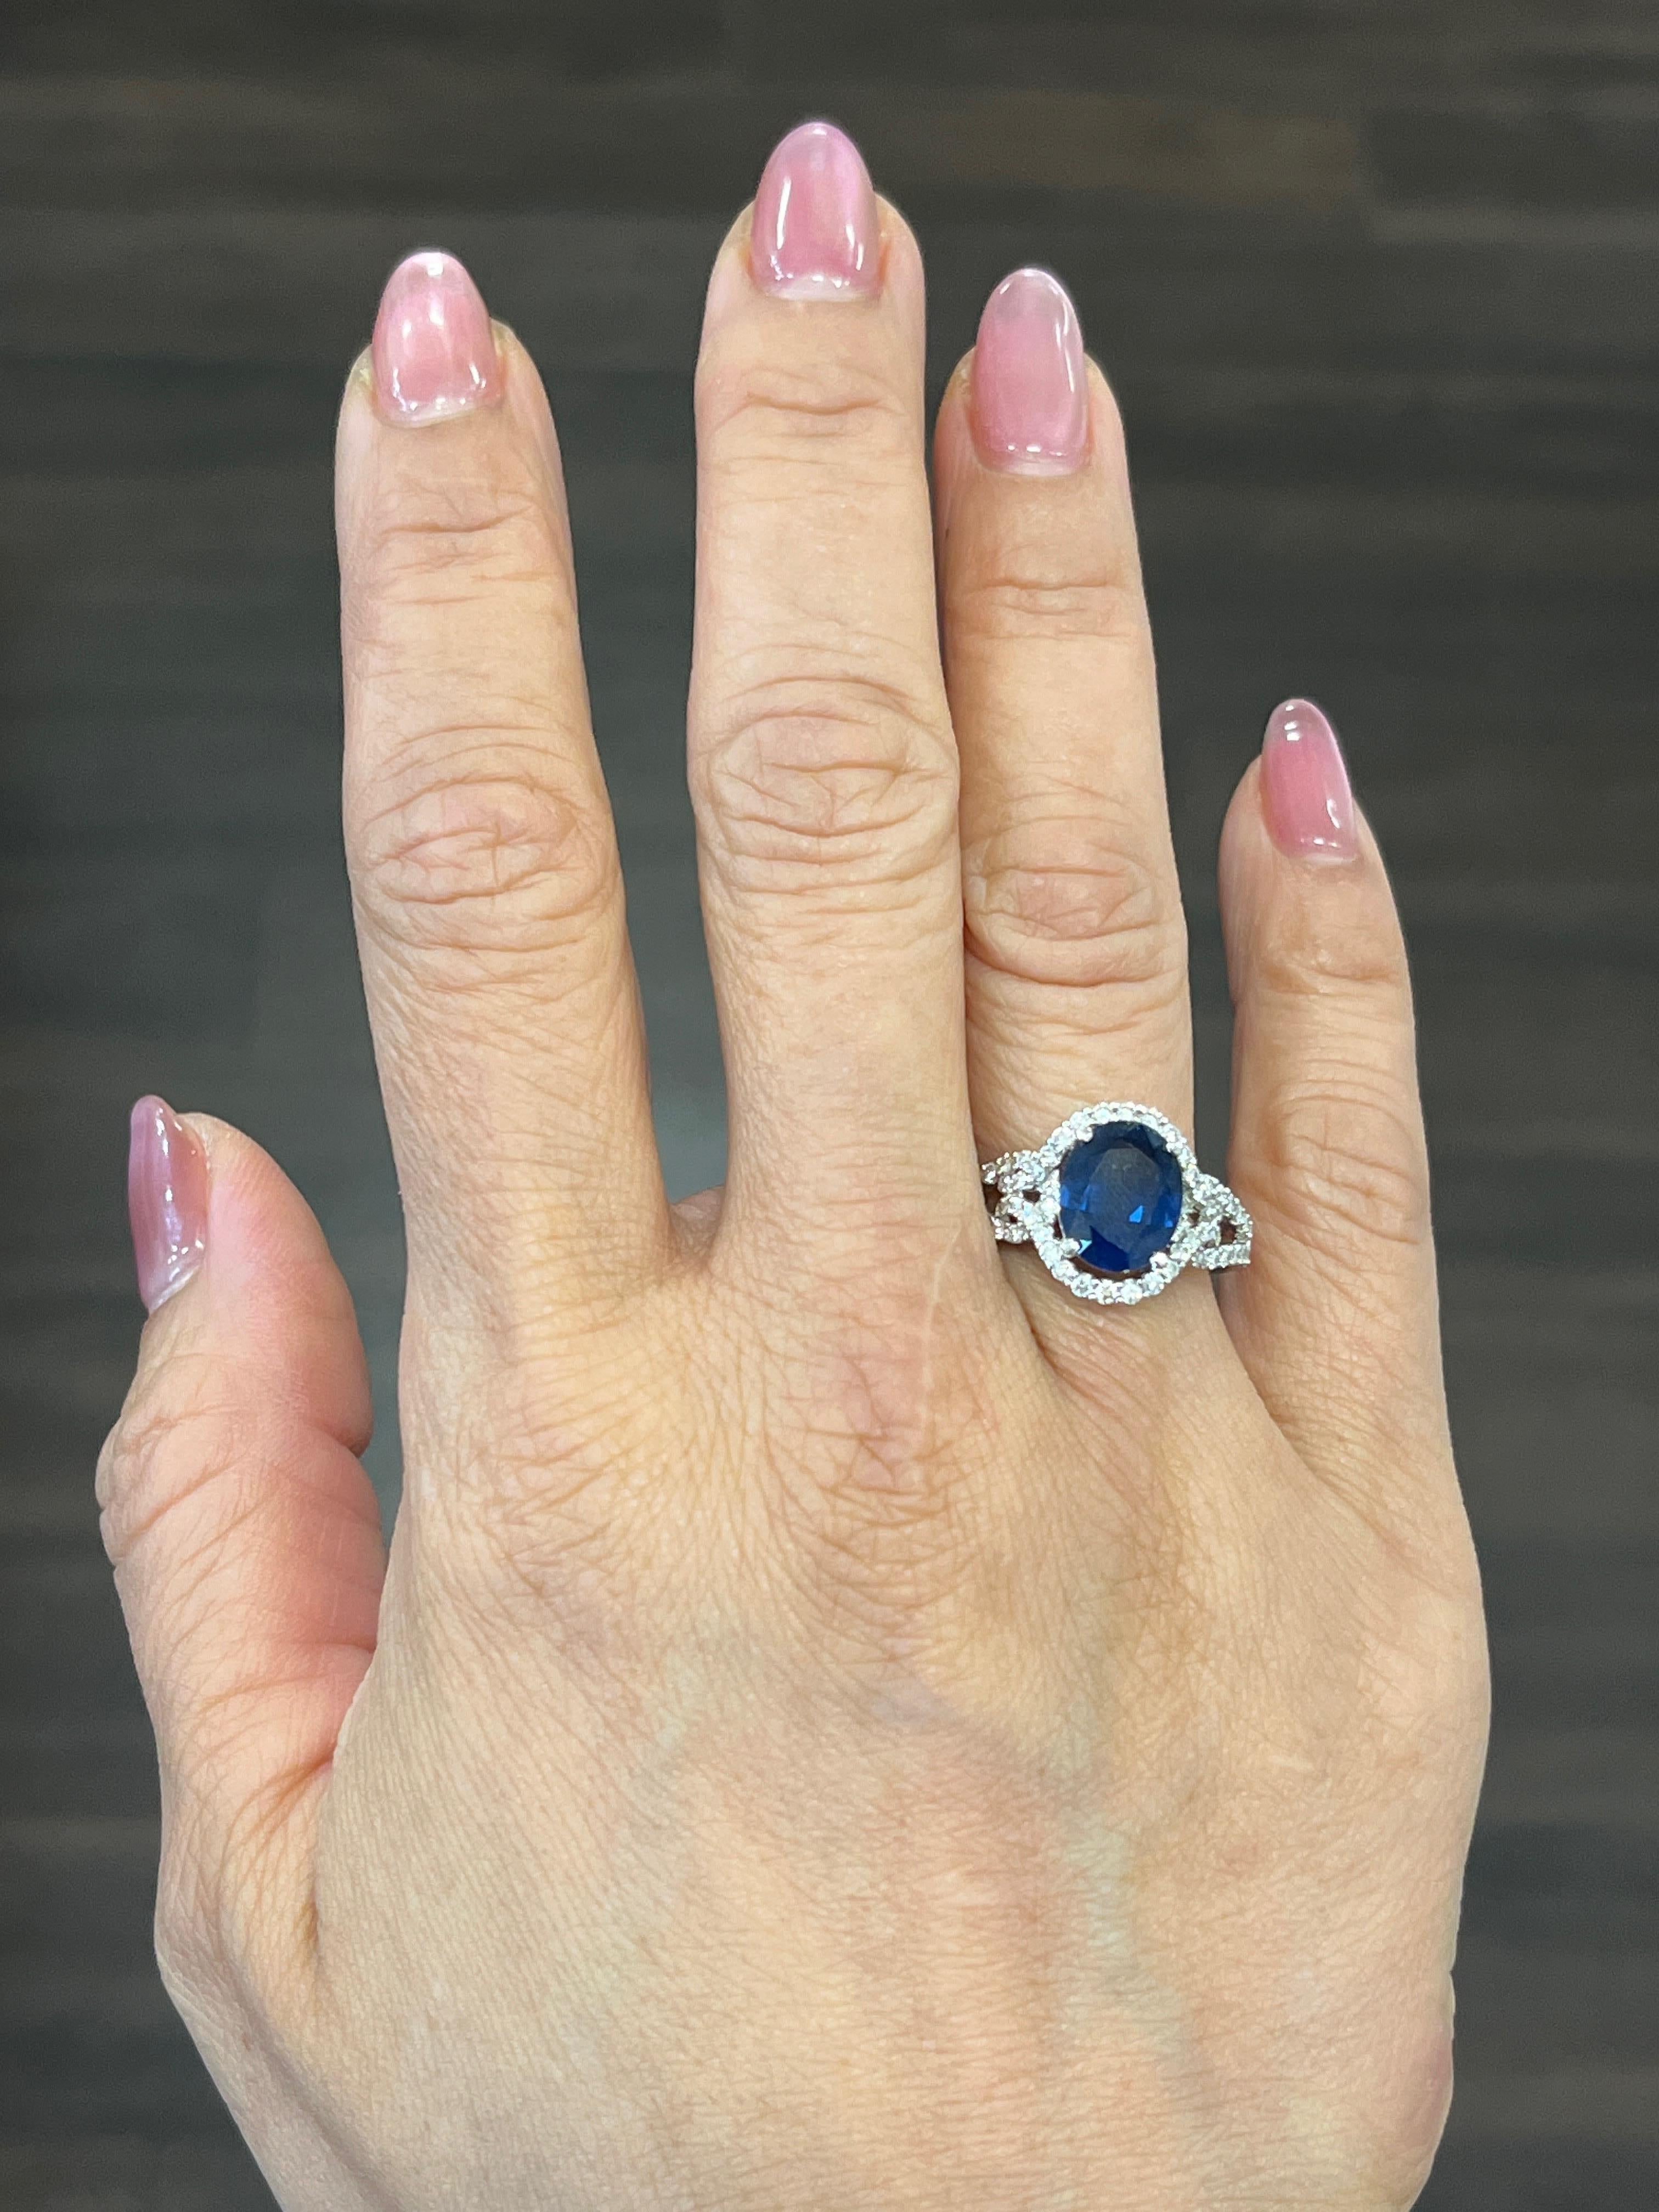 This gorgeous 18k white gold ring is set with a natural blue sapphire weighing 3.02 ct. It is surrounded with 66 round diamonds with a carat weight of 0.62. The diamonds boast a color or G/H and is SI1/SI2 in clarity. A beautiful ring to add to any